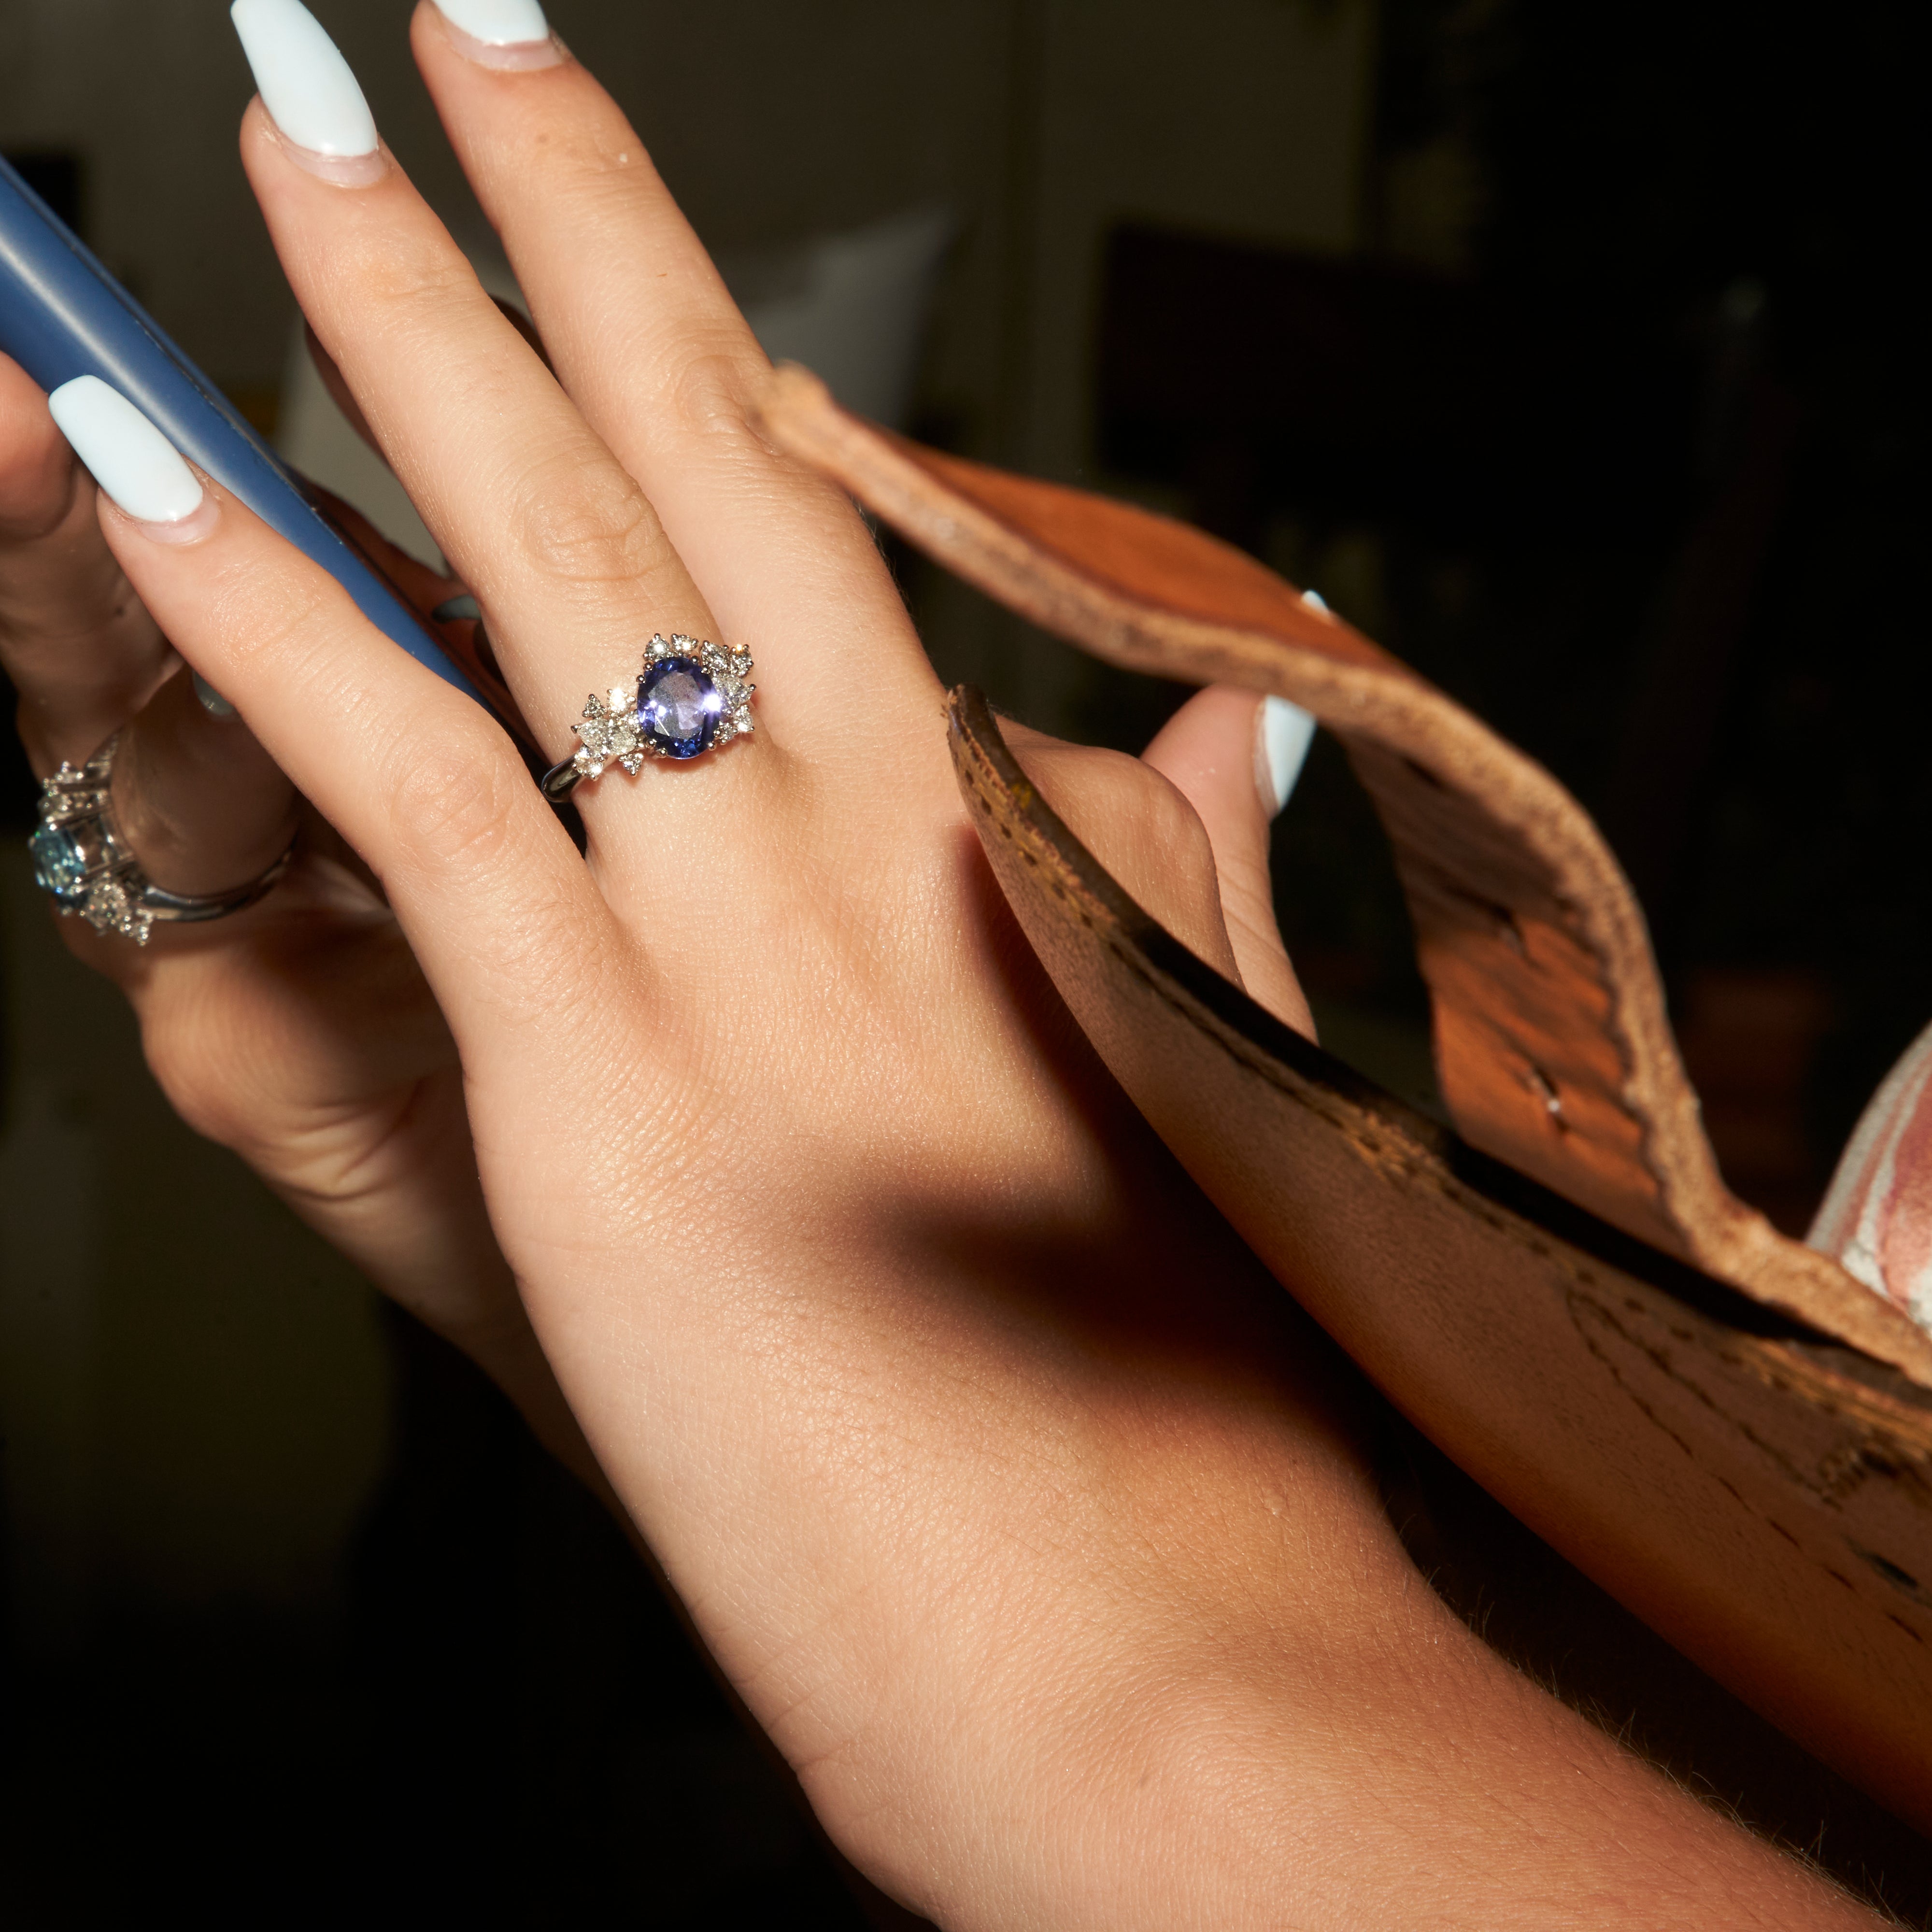 Classic ring by Klepto in white gold with tanzanite and fancy cut diamonds